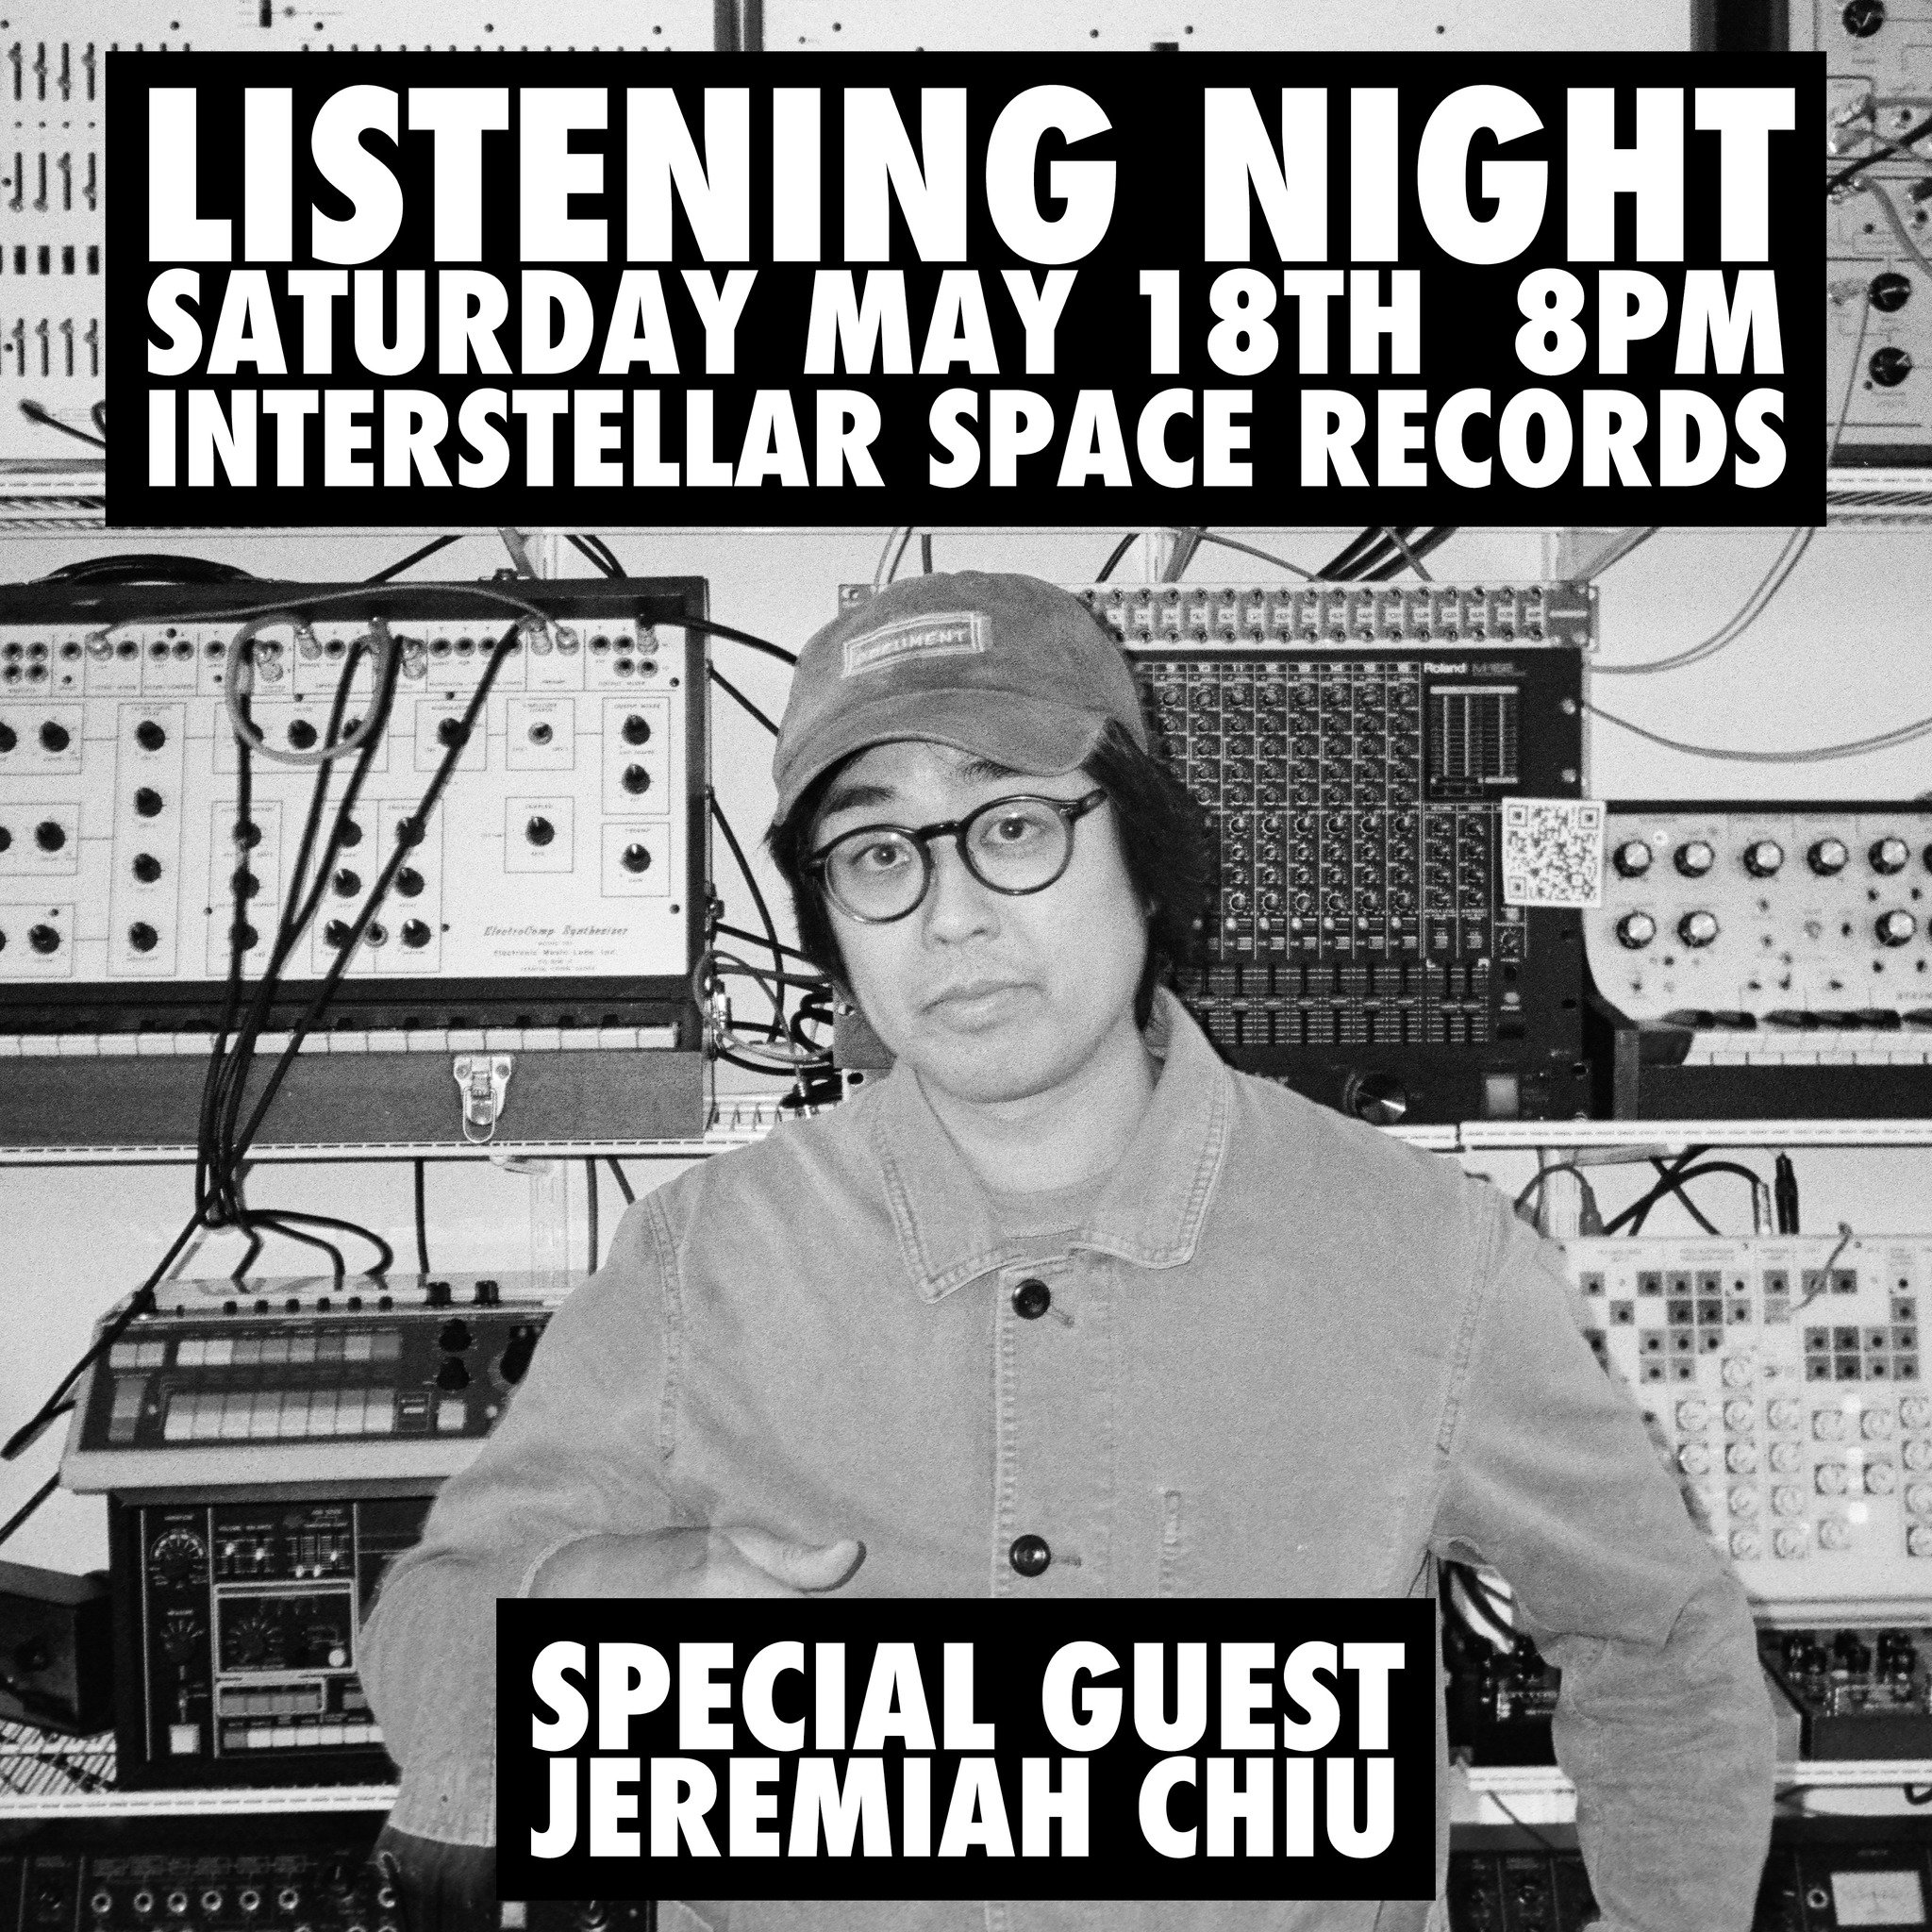 Friends and family in Chicago,
We&rsquo;re going to be hanging out with our brother @jeremiahchiu this Saturday at @_interstellarspace_ to have a listen to 𝑻𝒉𝒆 𝑪𝒍𝒐𝒔𝒆𝒔𝒕 𝑻𝒉𝒊𝒏𝒈 𝒕𝒐 𝑺𝒊𝒍𝒆𝒏𝒄𝒆. Check out the nerdy details below ✨

ʟɪꜱ